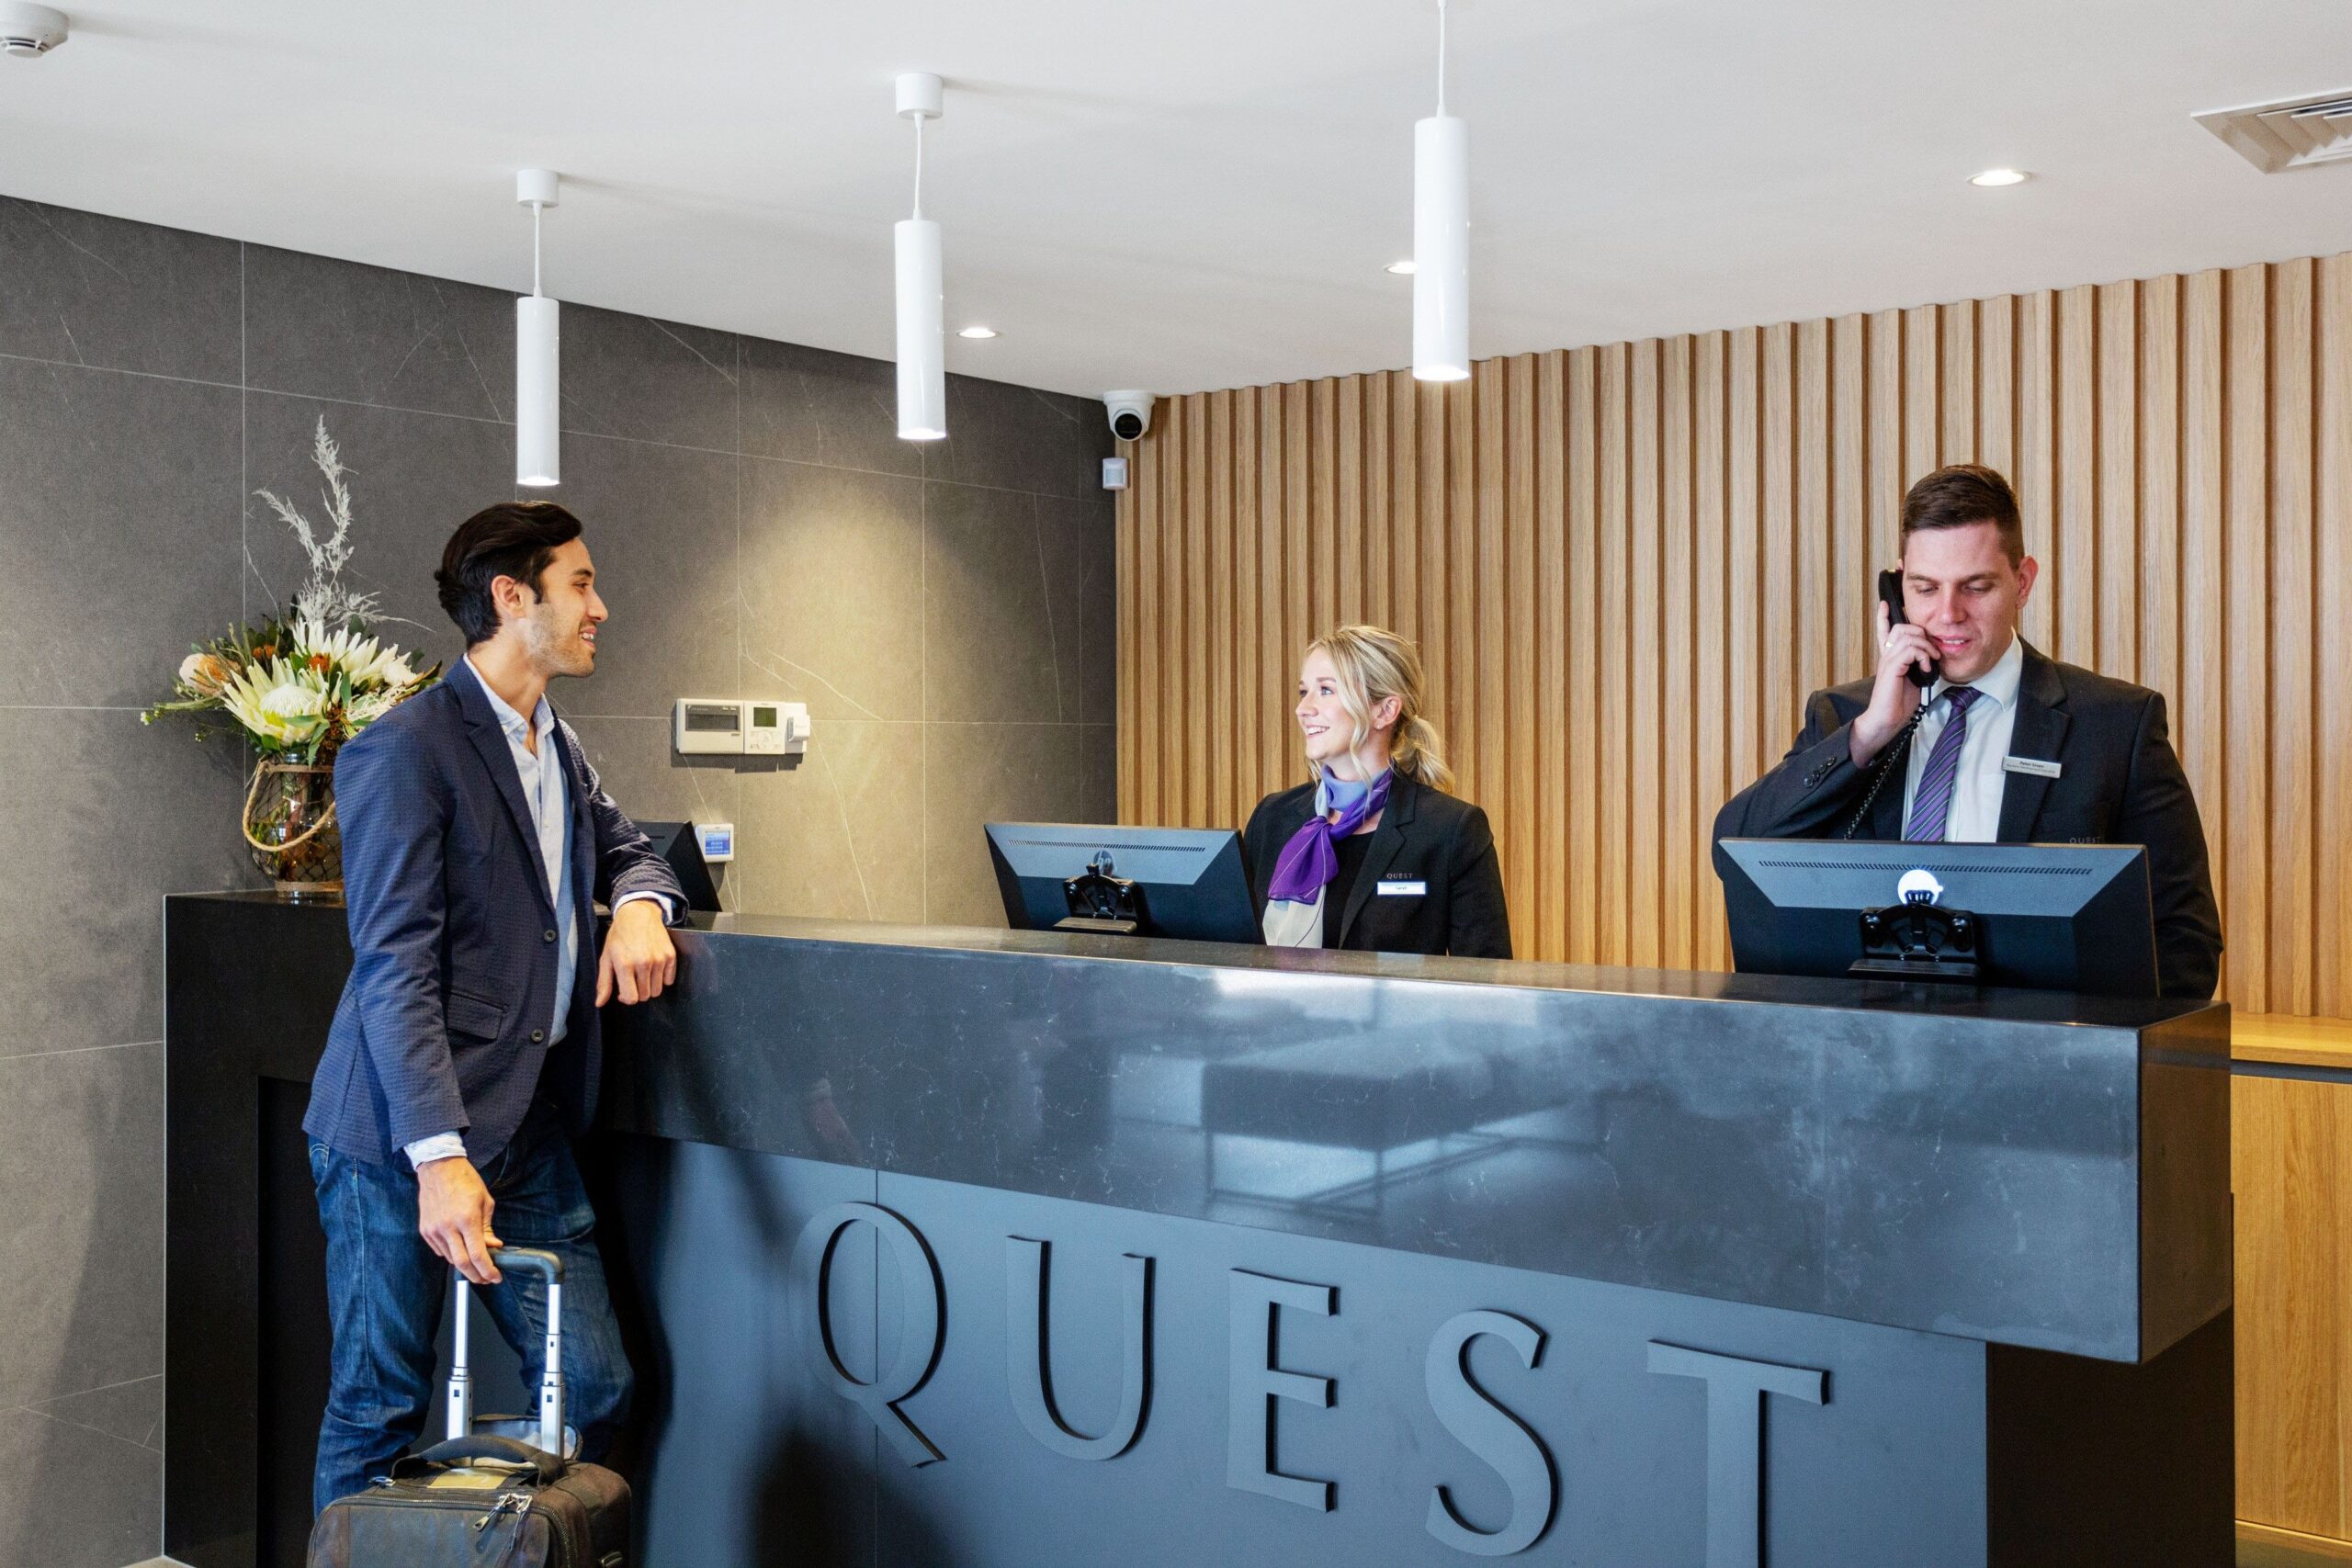 Quest awarded 5-star rating again